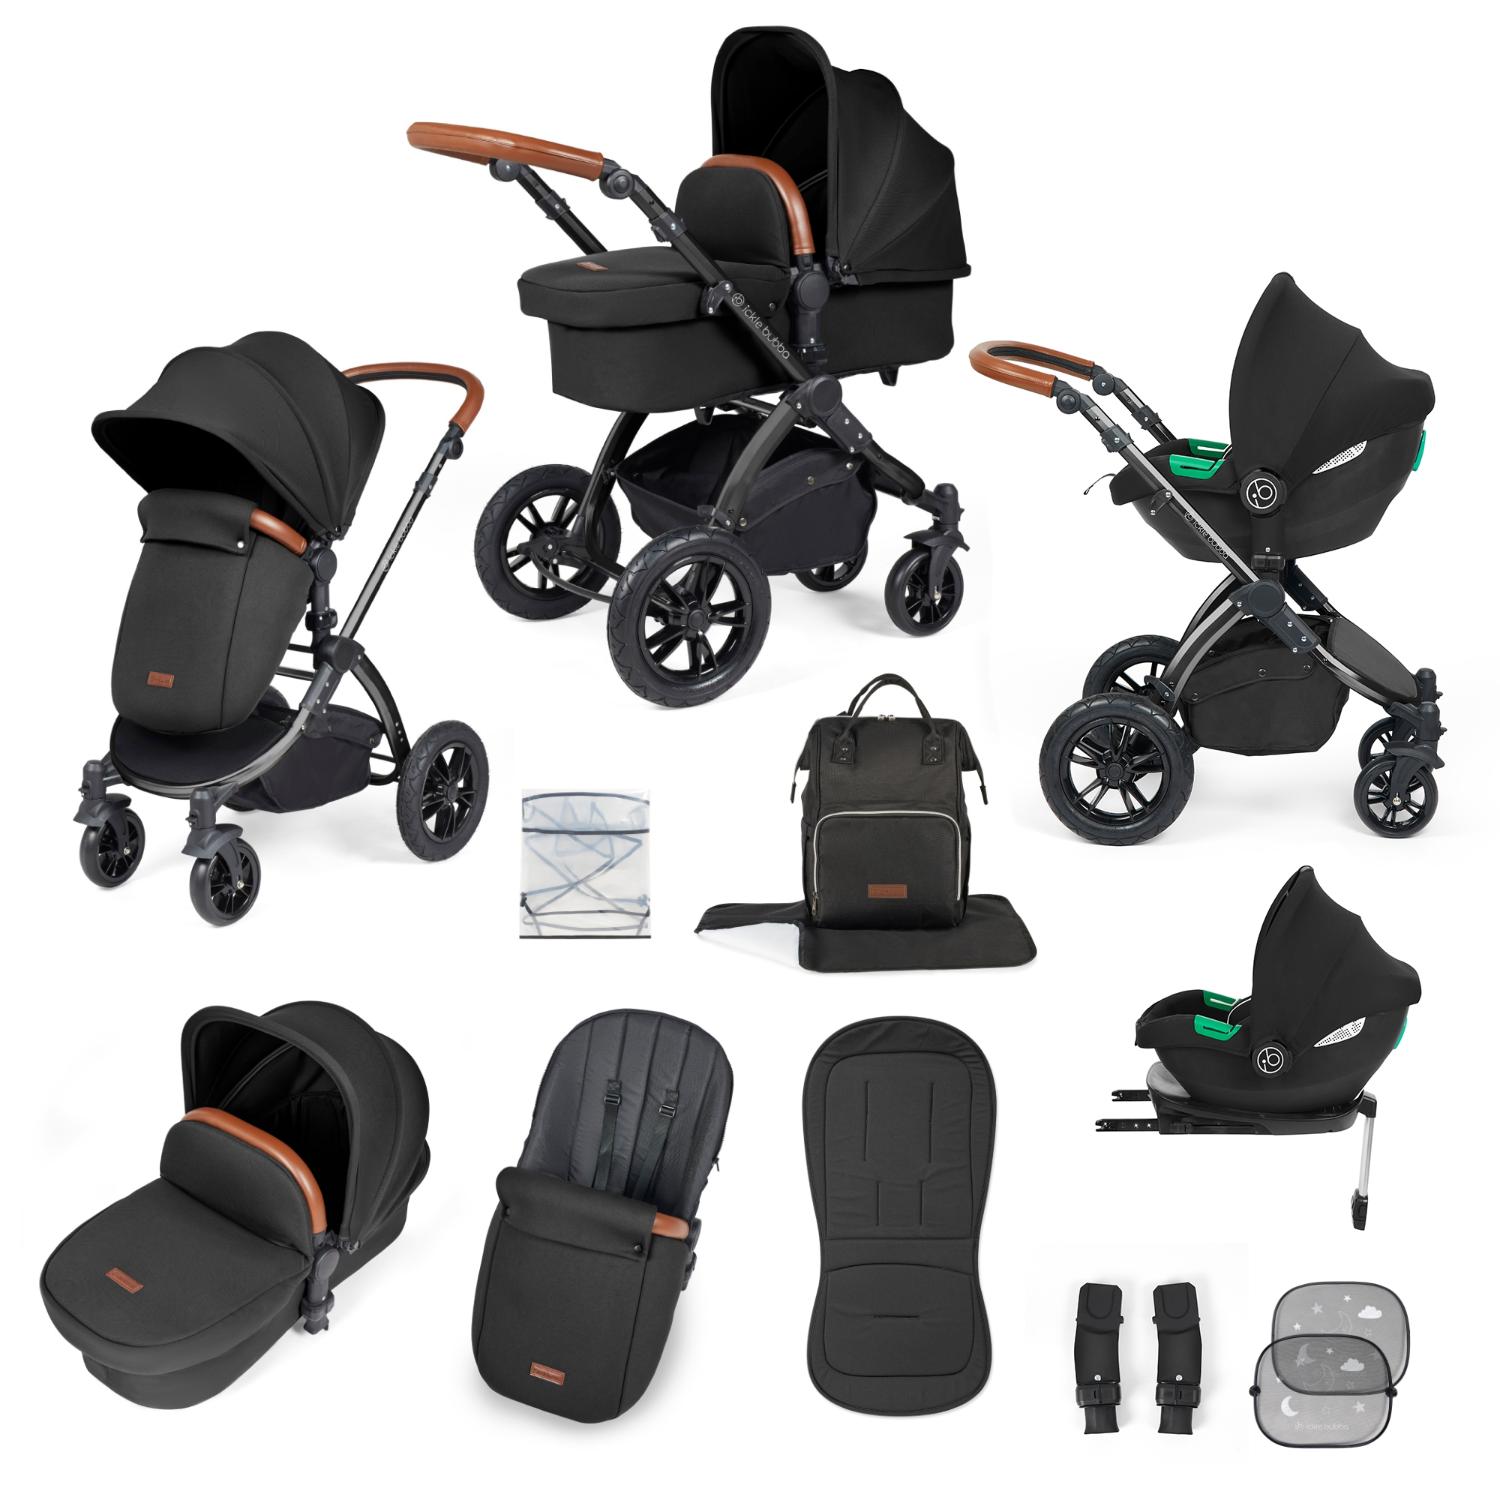 Ickle Bubba Stomp Luxe All-in-One Travel System with Cirrus i-Size Car Seat and ISOFIX Base and accessories in Midnight black colour with tan handle